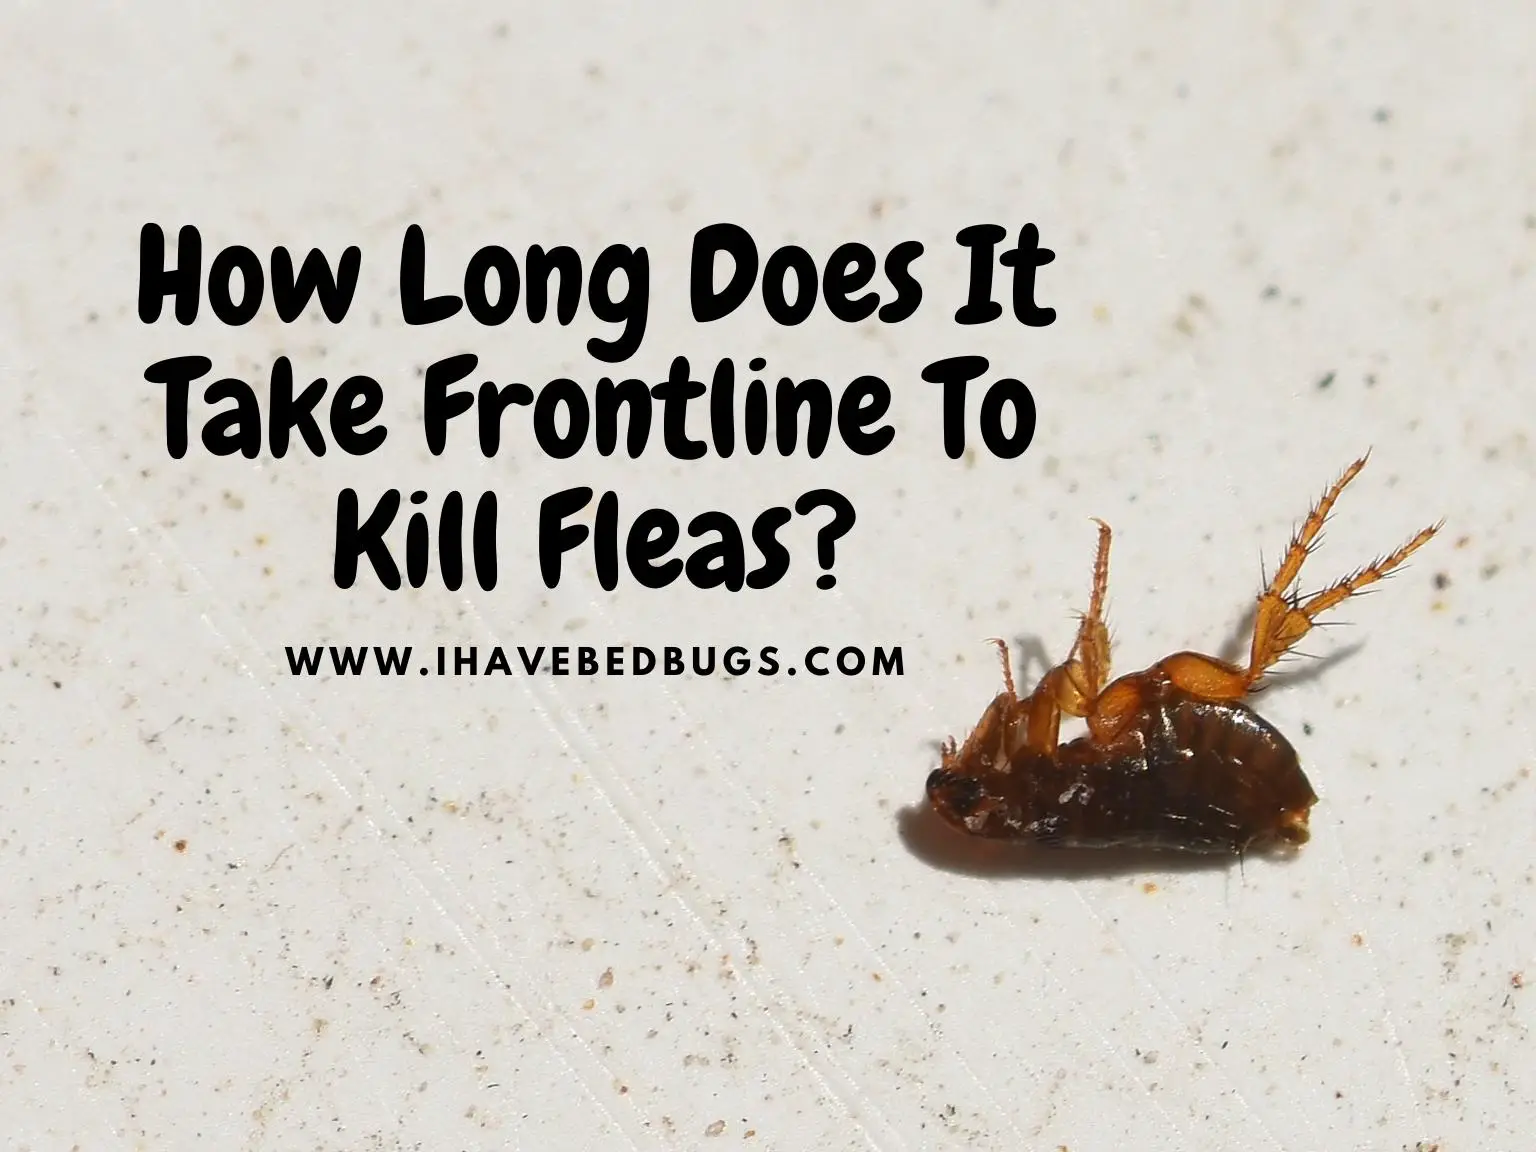 How-Long-Does-It-Take-Frontline-To-Kill-Fleas